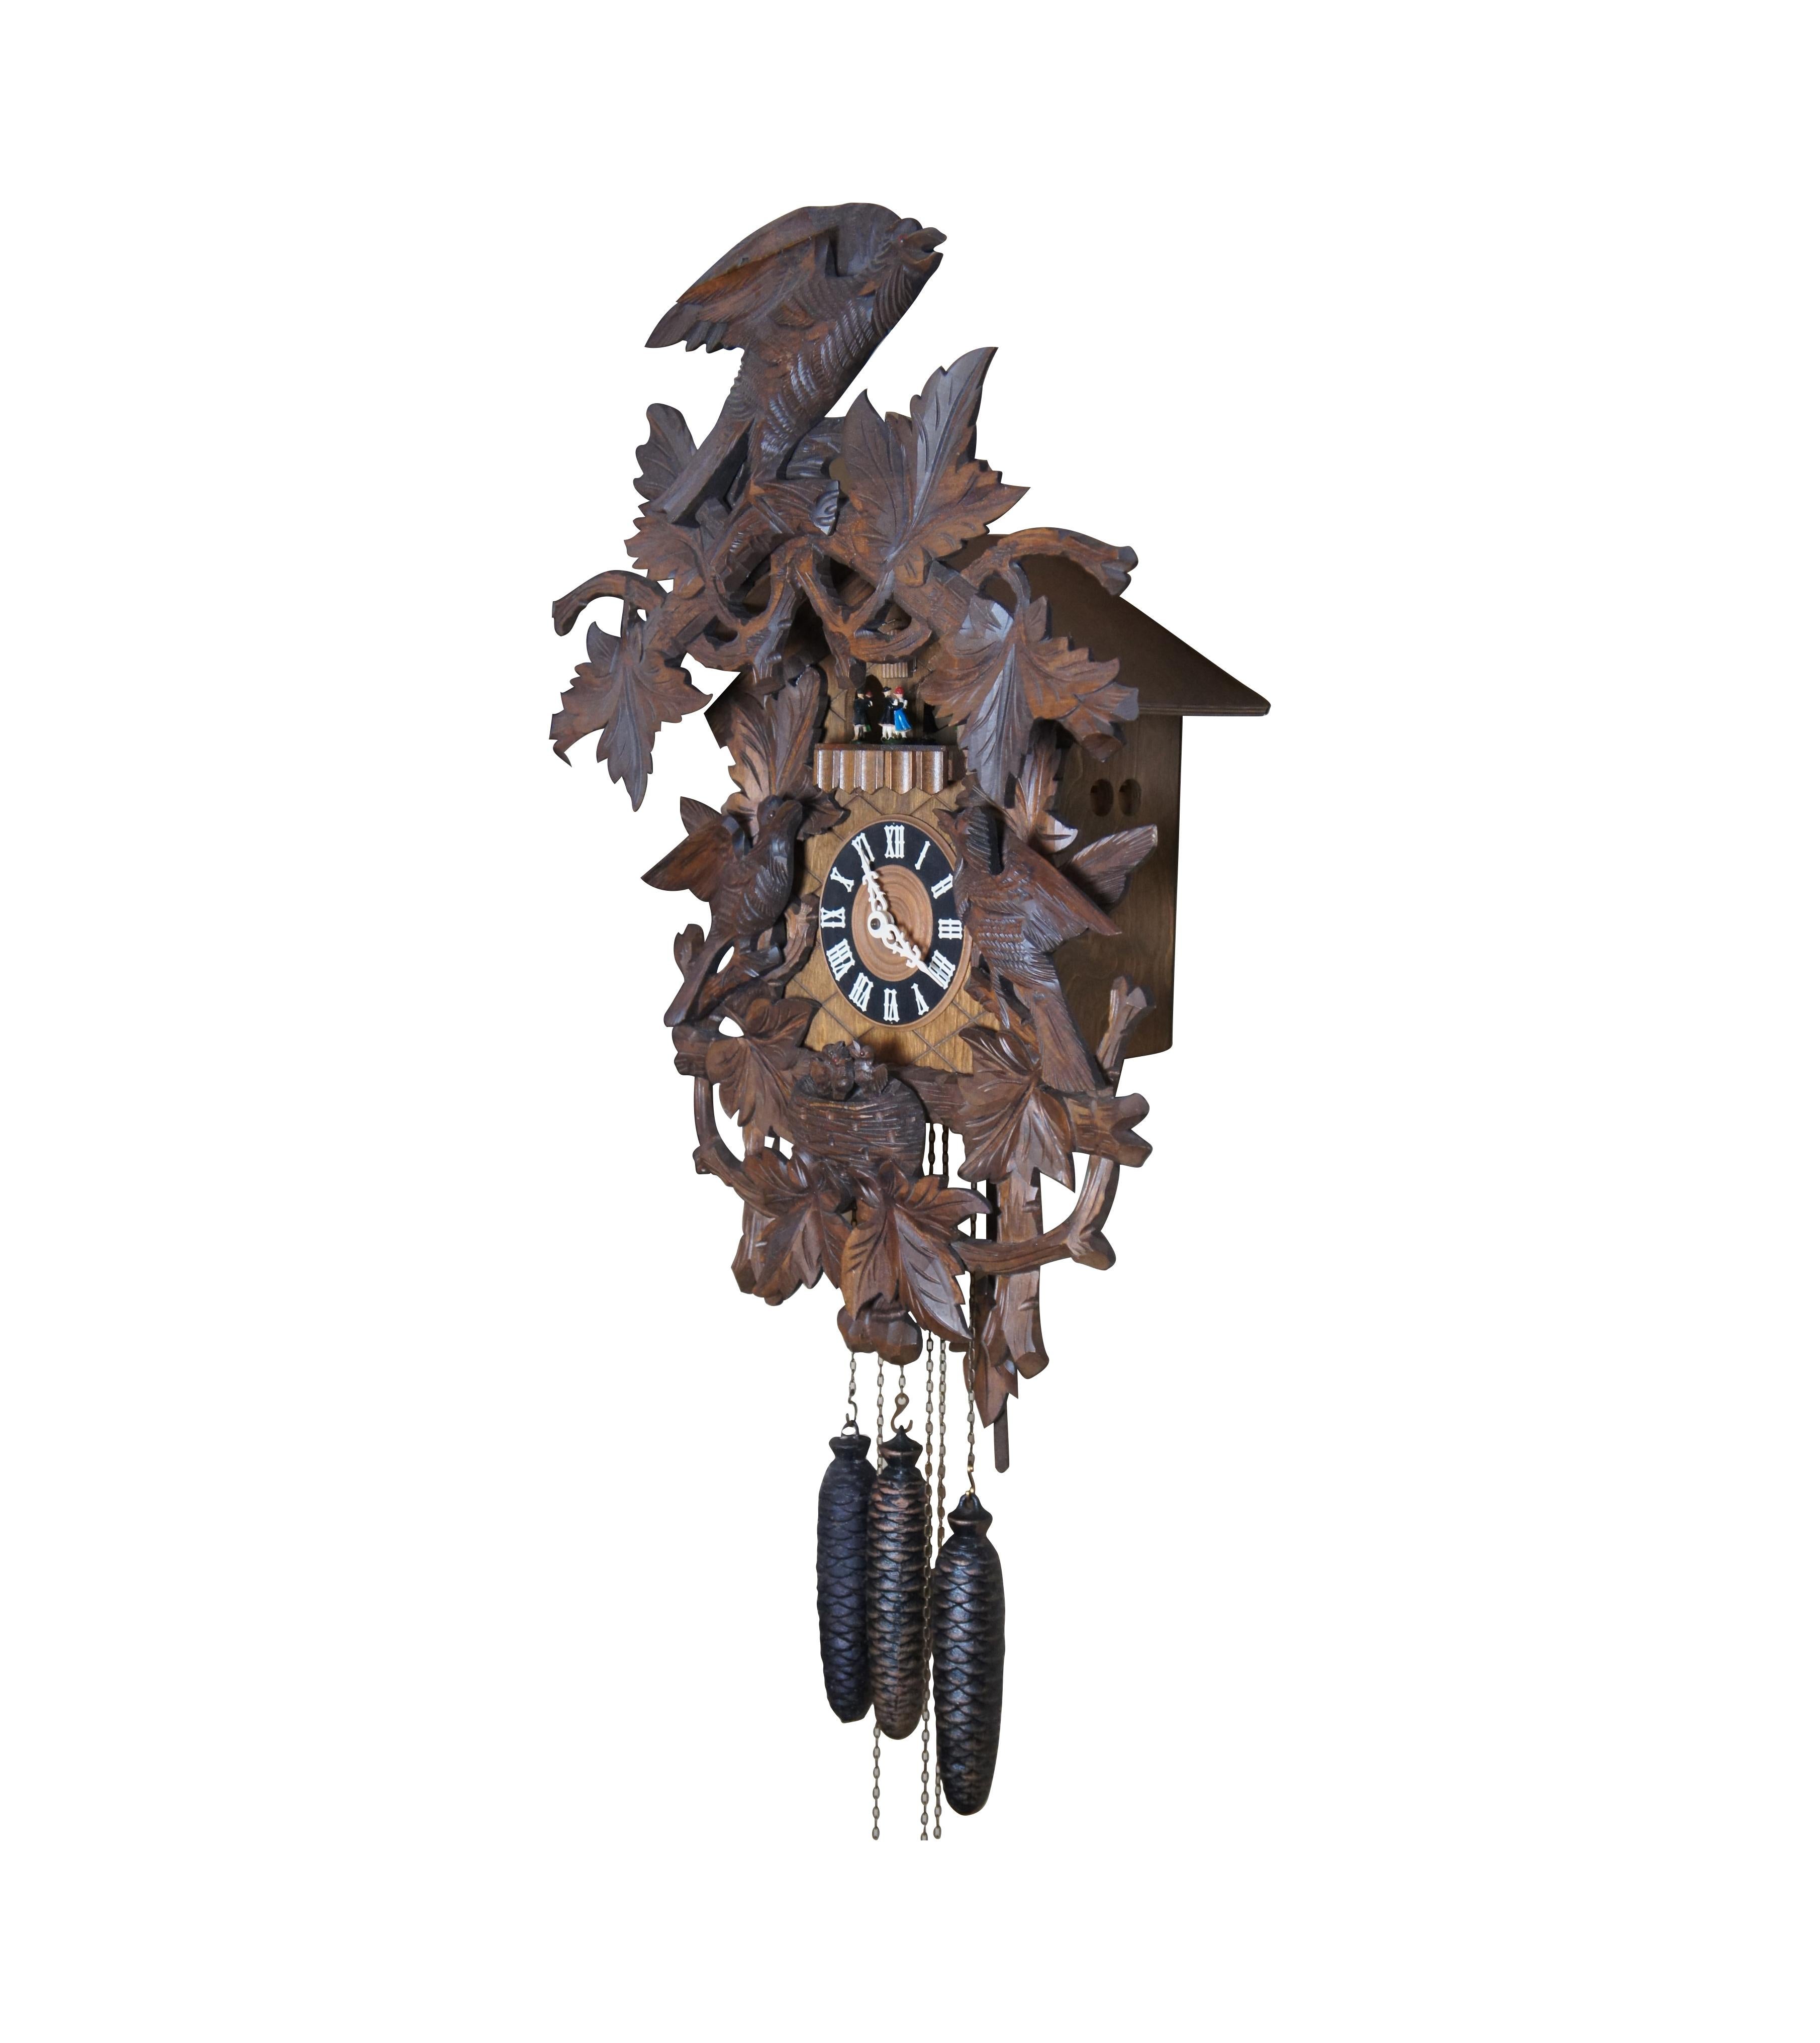 A large vintage black forest cuckoo wall clock, made in Germany. Features Regula-72 German 8 day movement with Cuendet Swiss musical movement playing Lara's Theme from Dr. Zhivago. The Roman numeral clock face has a lattice backing and is surrounded